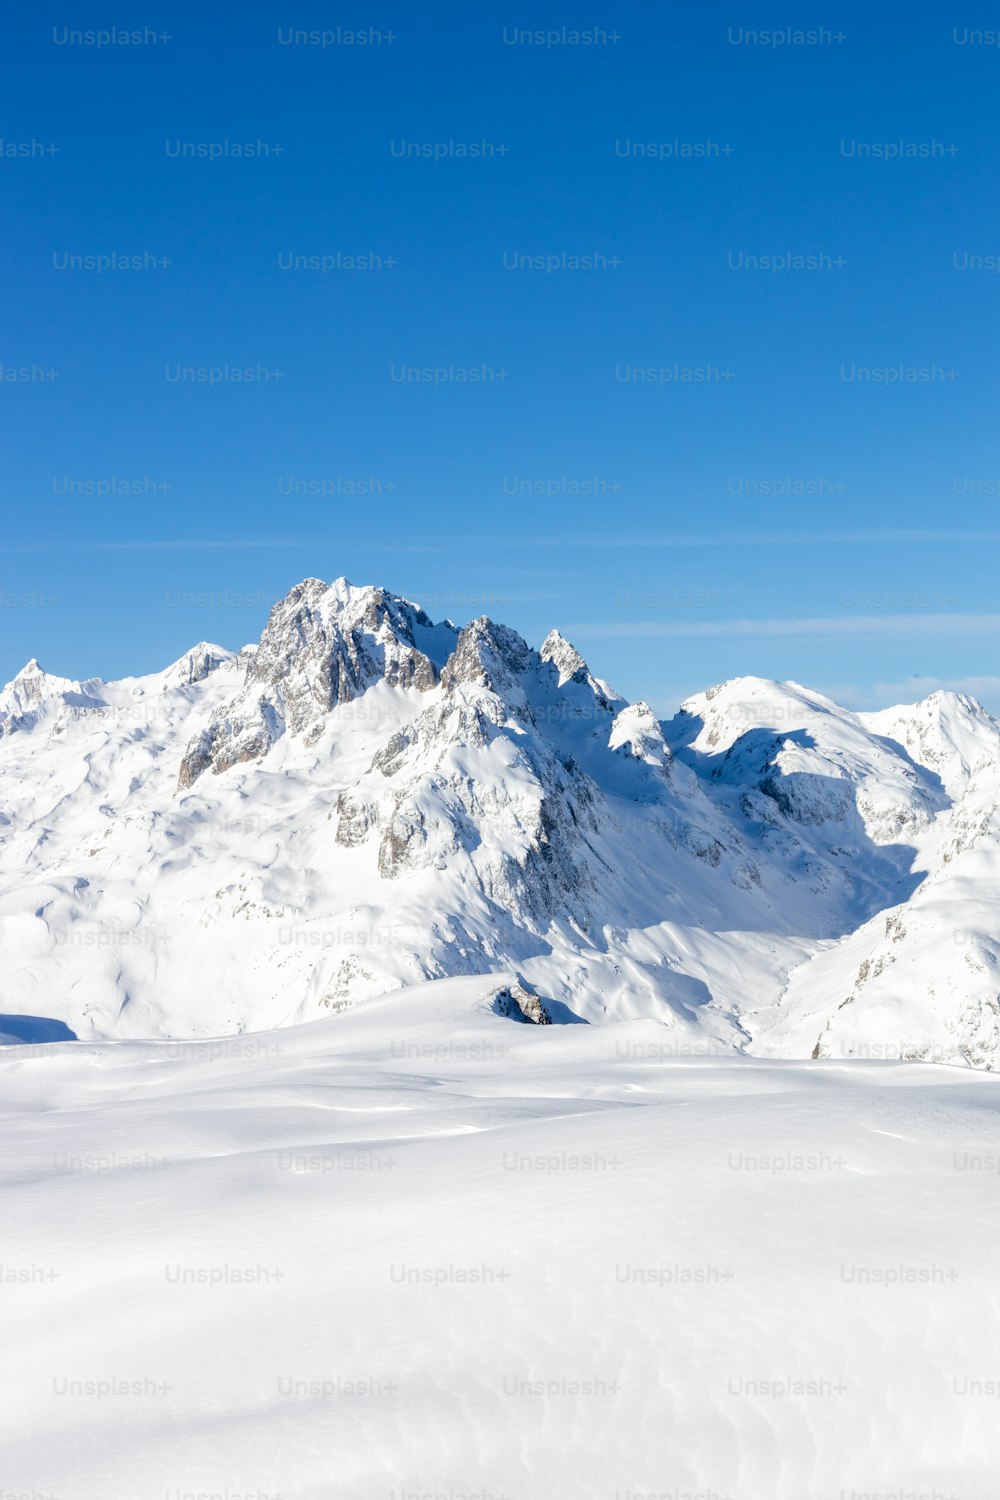 a man riding skis on top of a snow covered slope